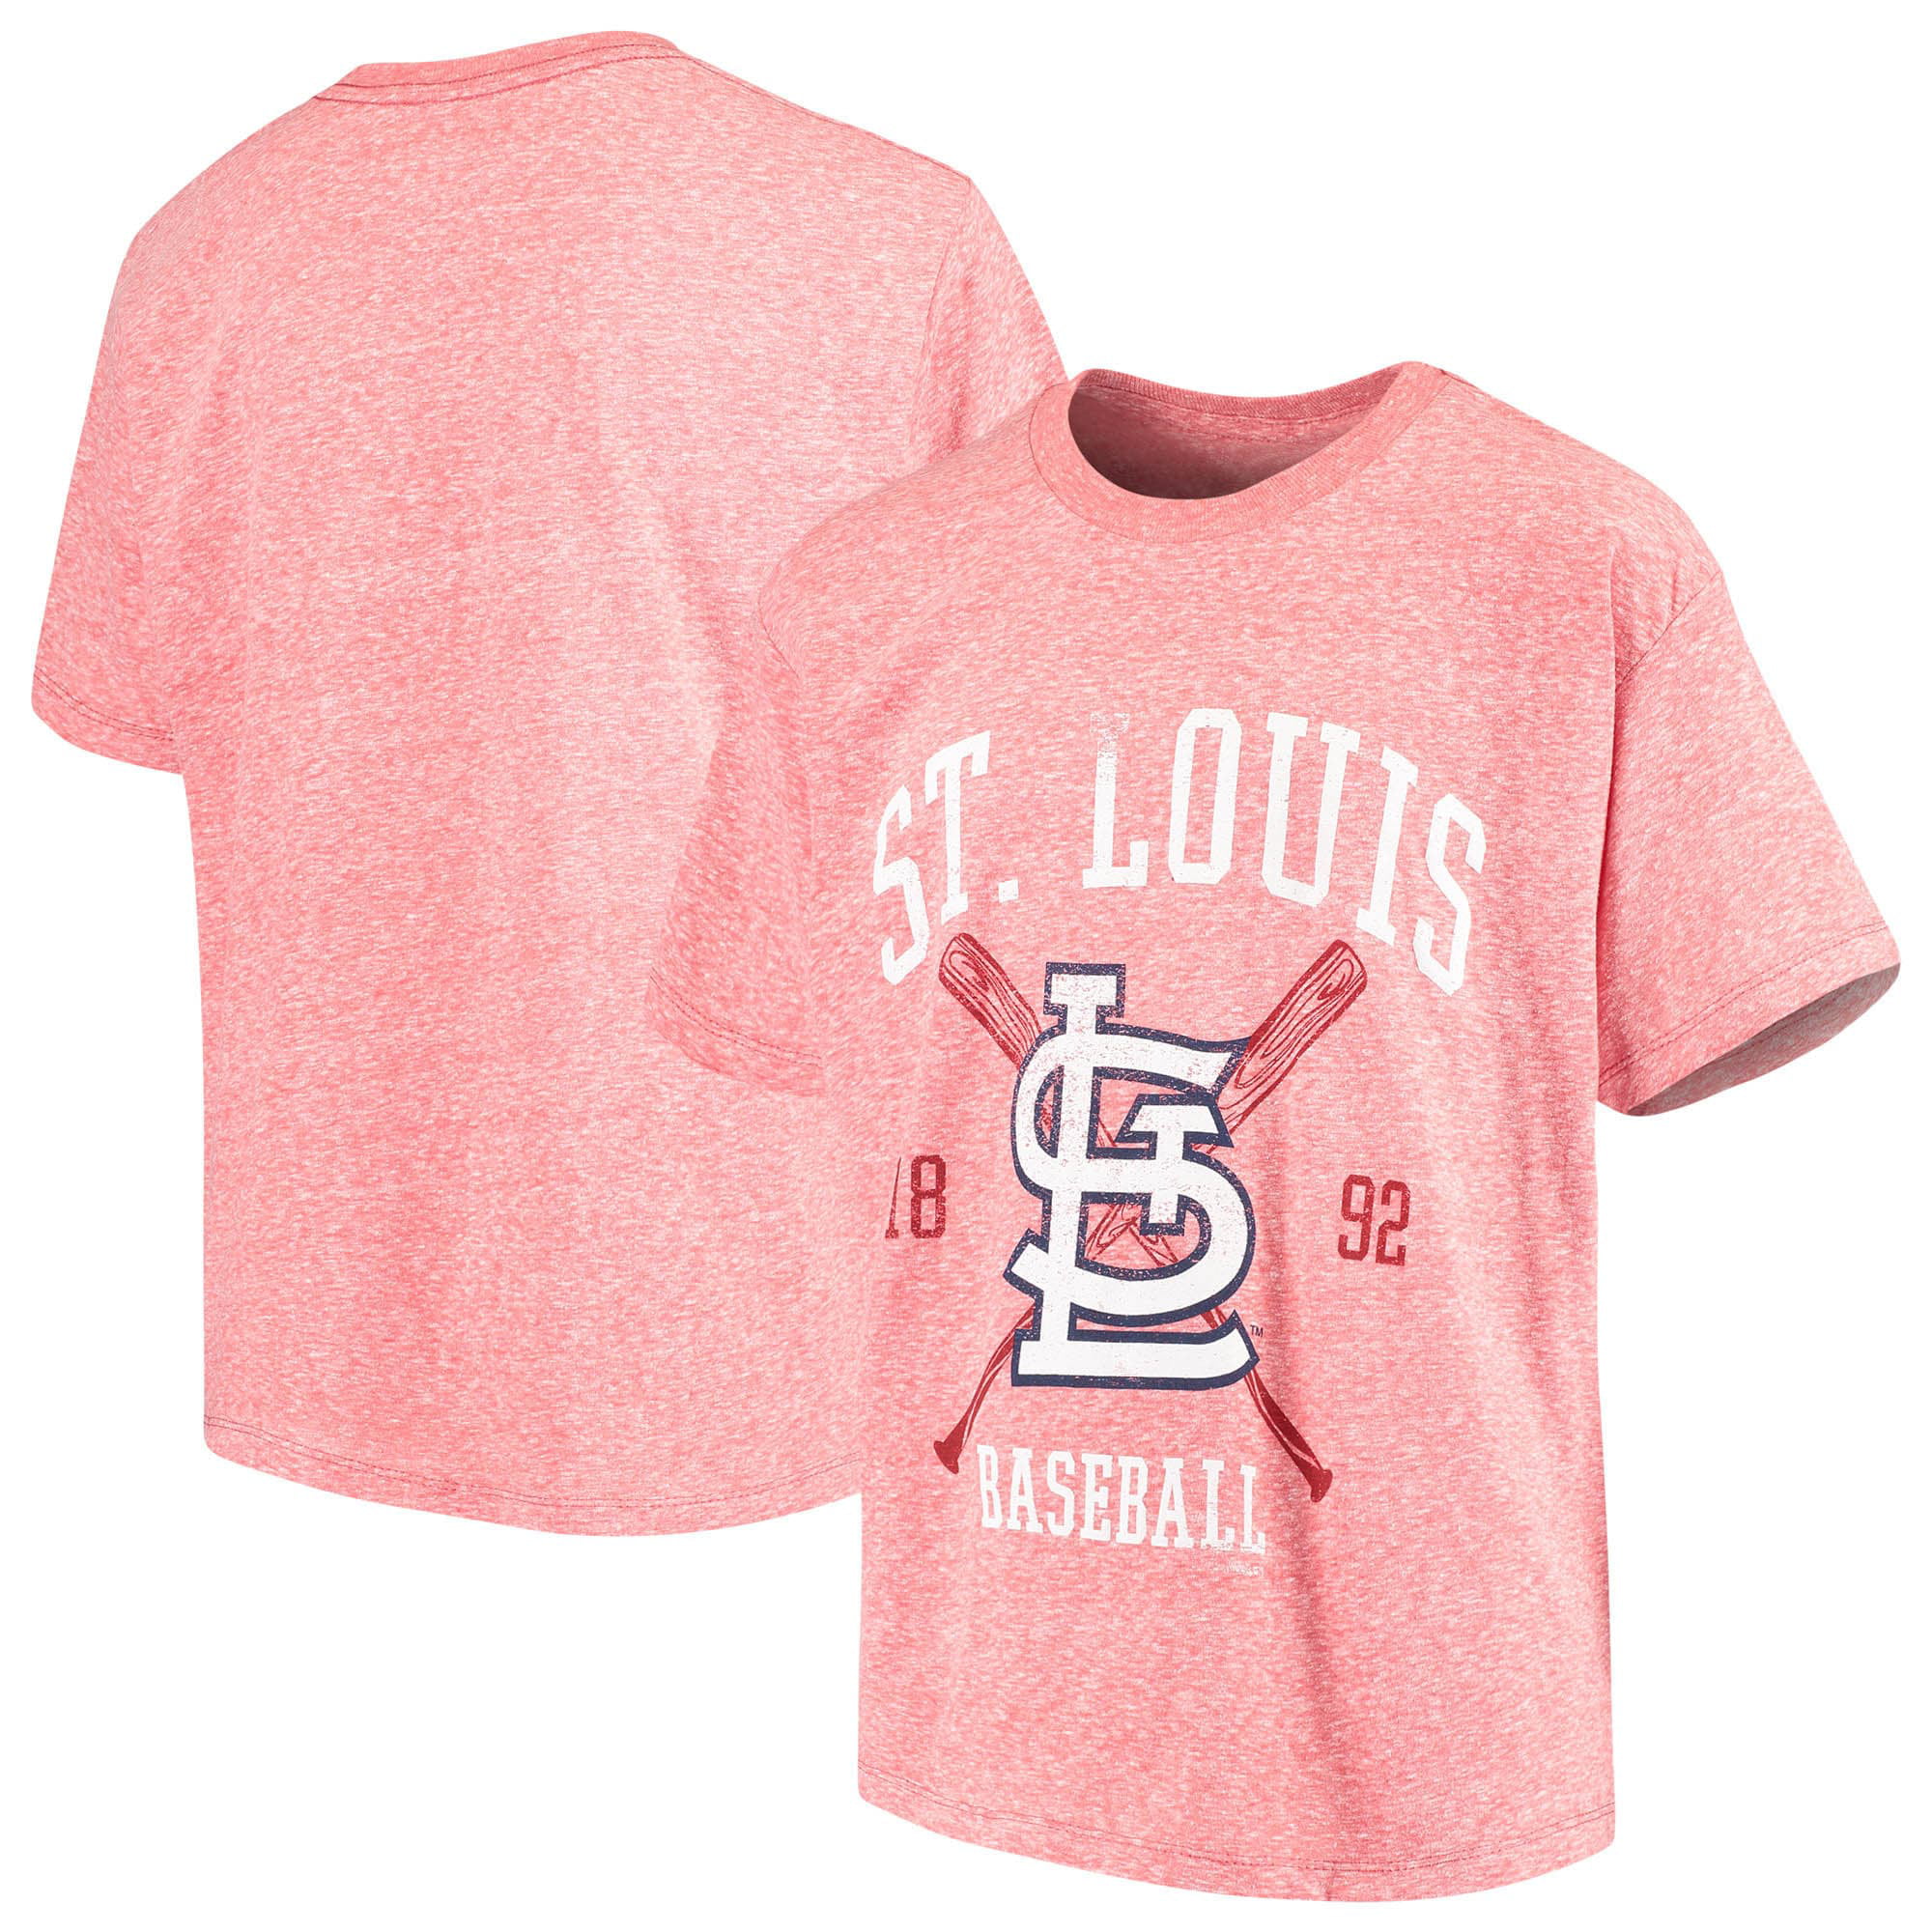 Stitches - St. Louis Cardinals Youth Heather T-Shirt - Red - 0 - 0